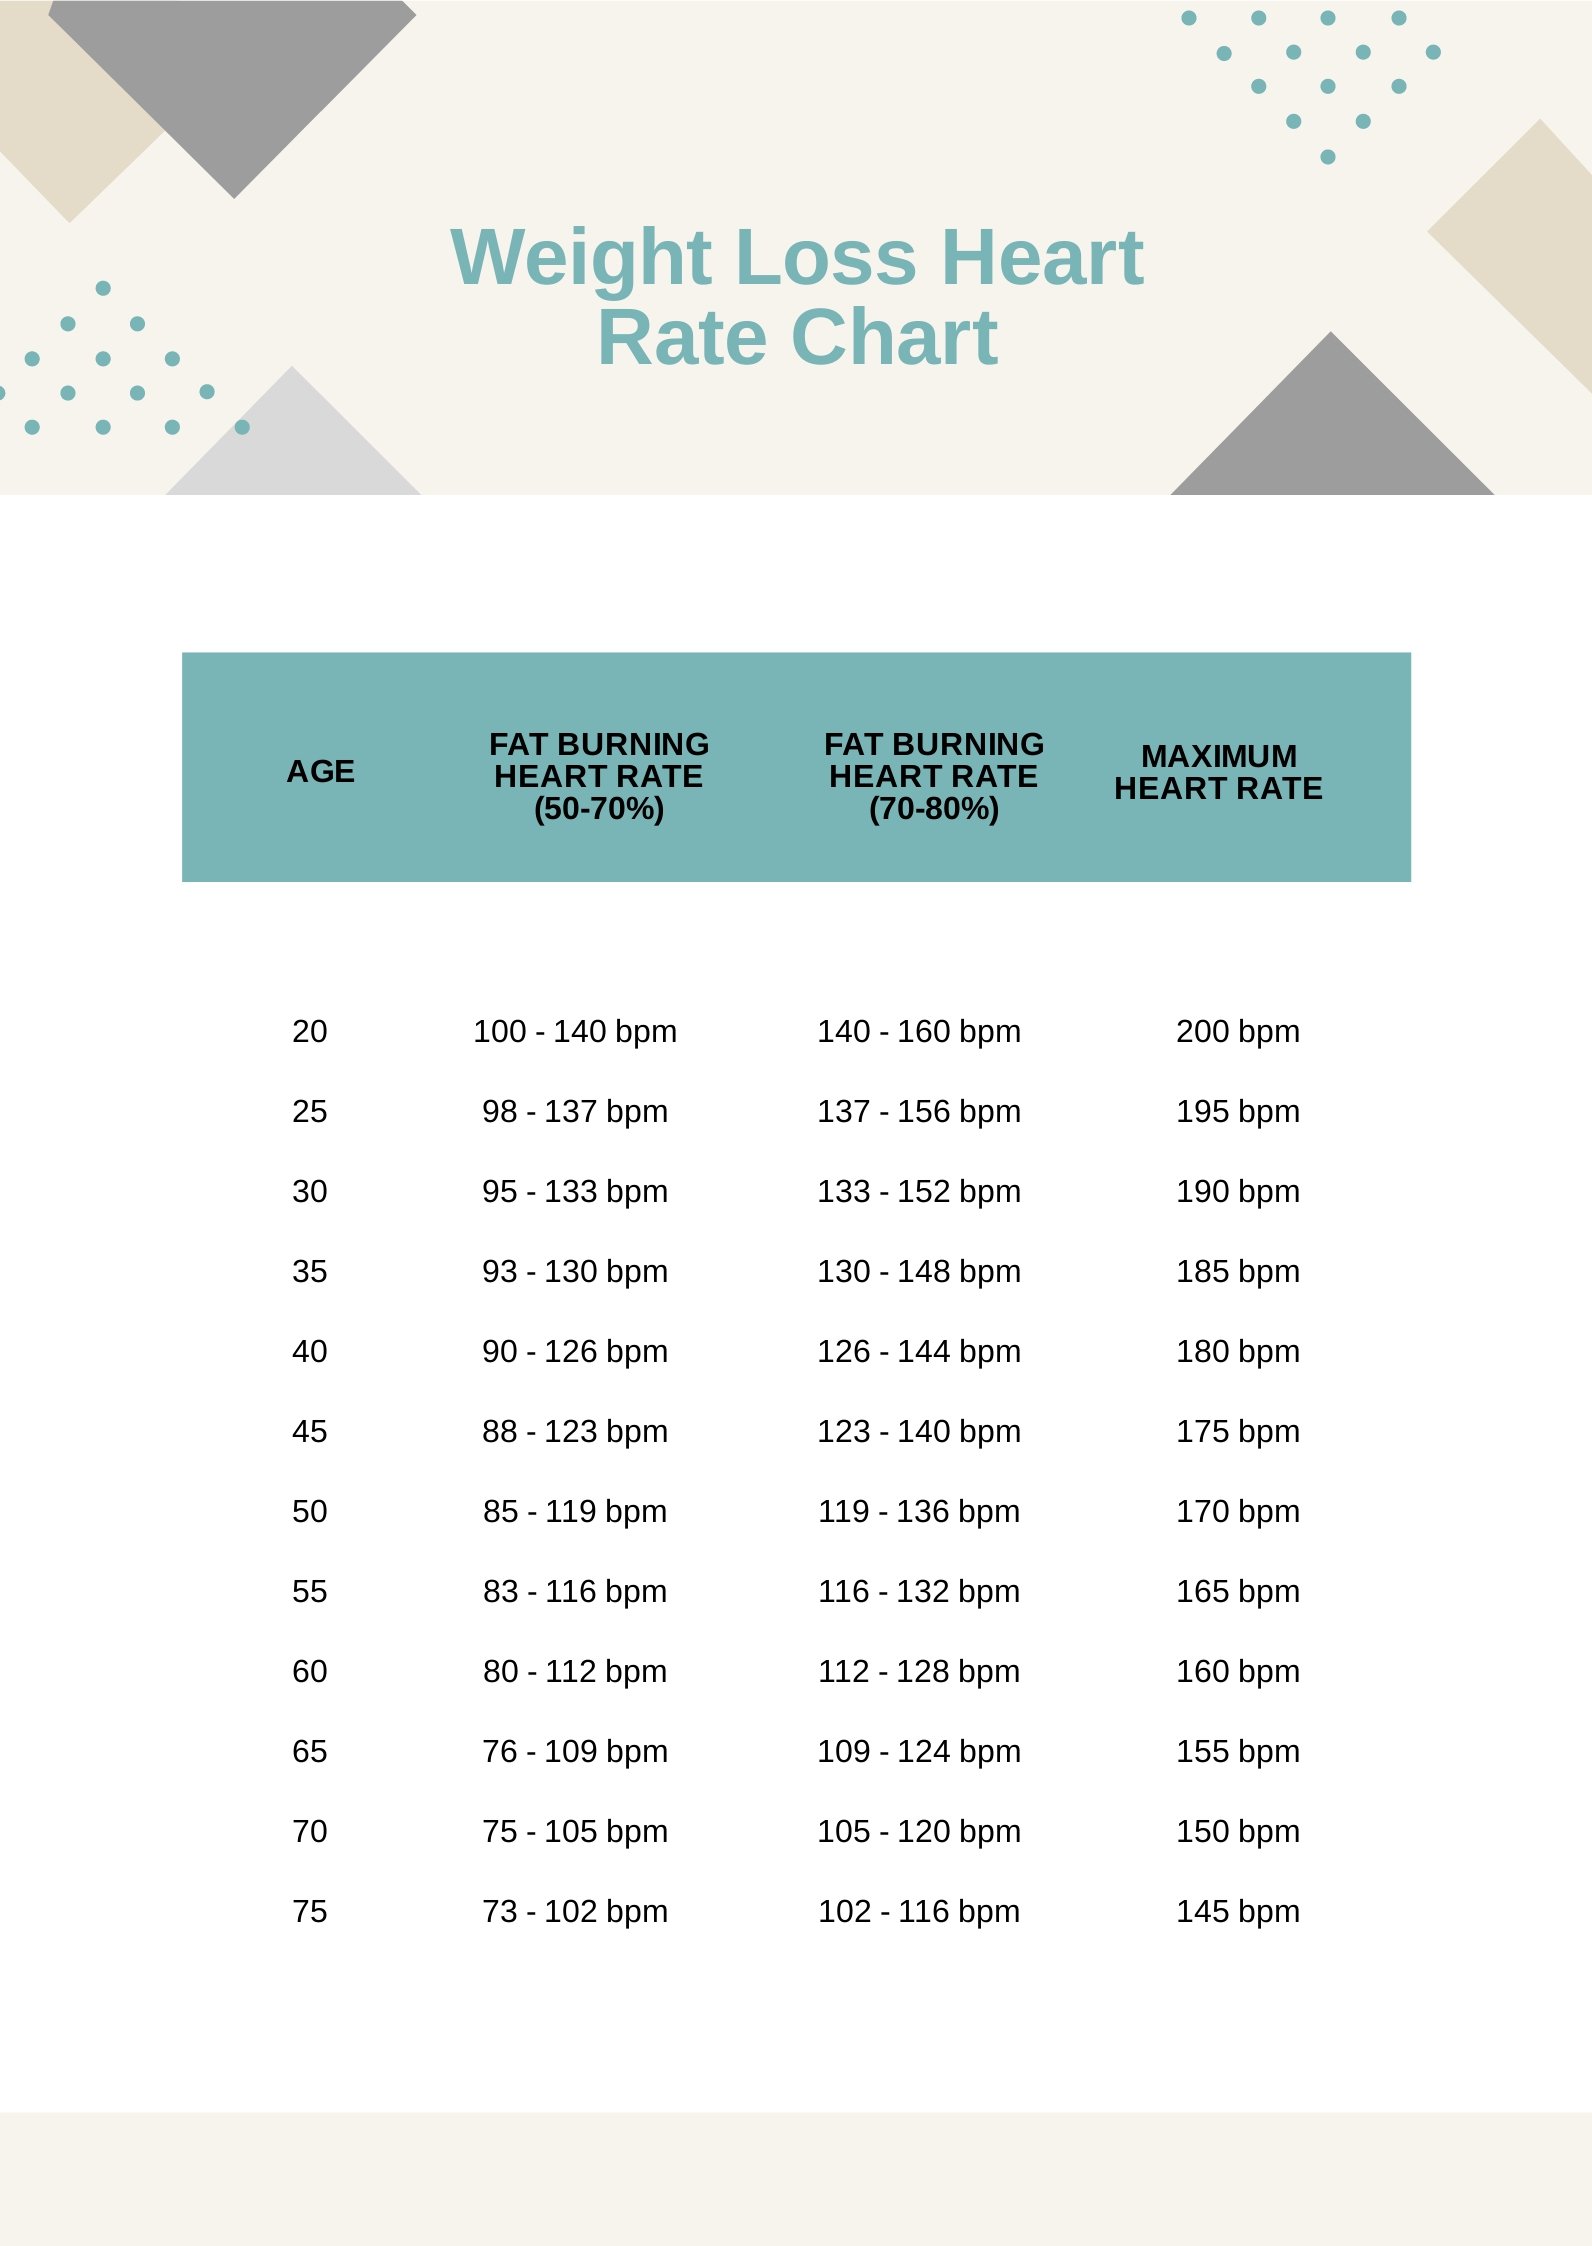 Weight Loss Heart Rate Chart in PDF